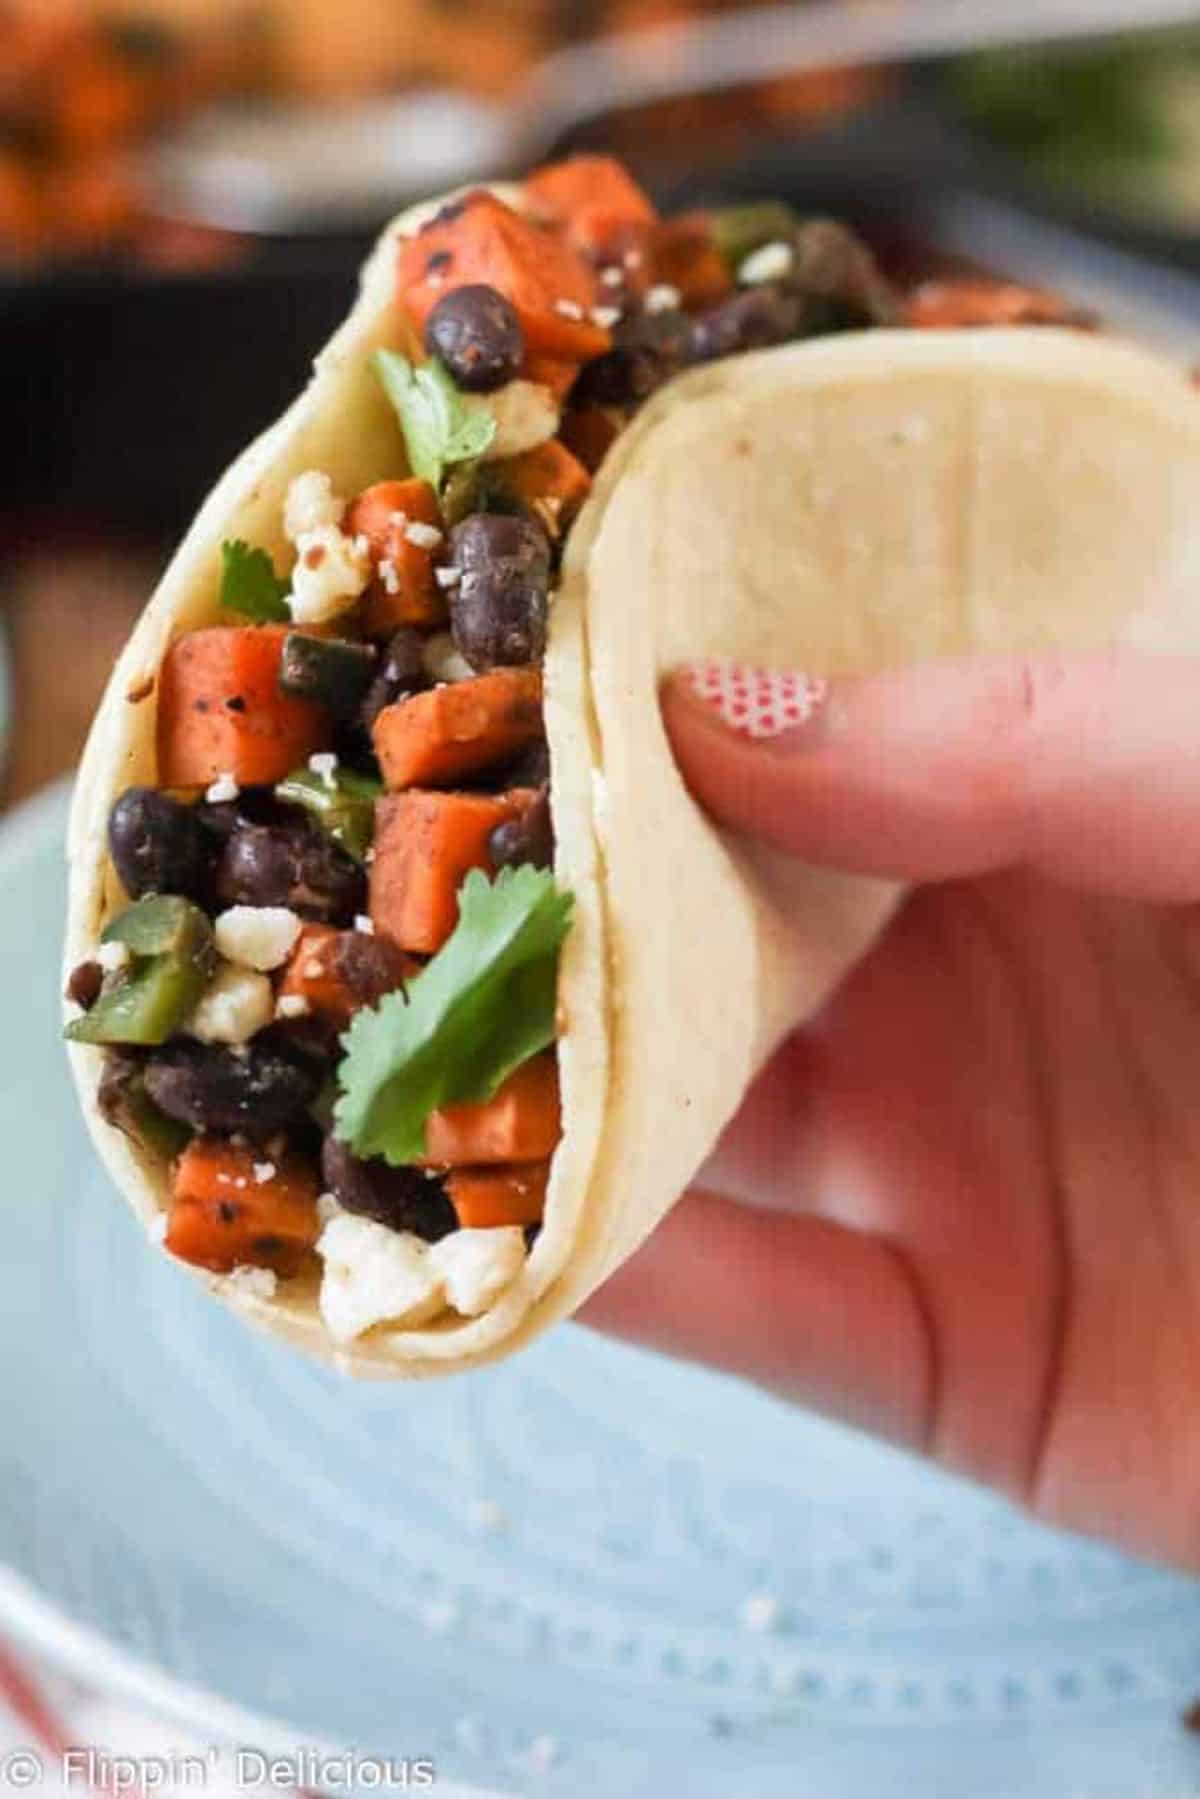 Mouth-watering Sweet Potato and Black Bean Vegetarian Tacos held by hand.